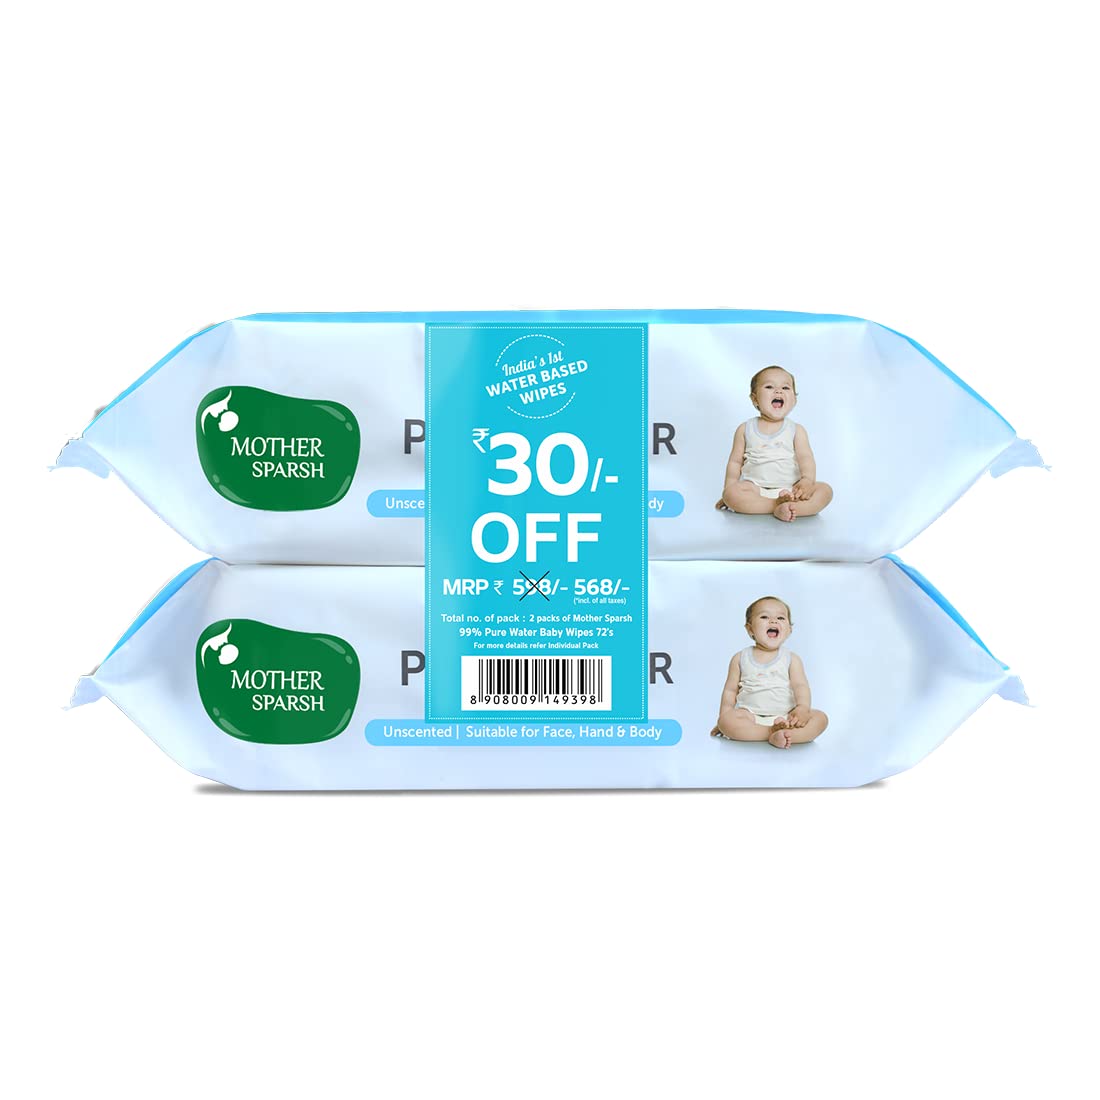 Mother Sparsh 99% Pure Water Baby Wipes